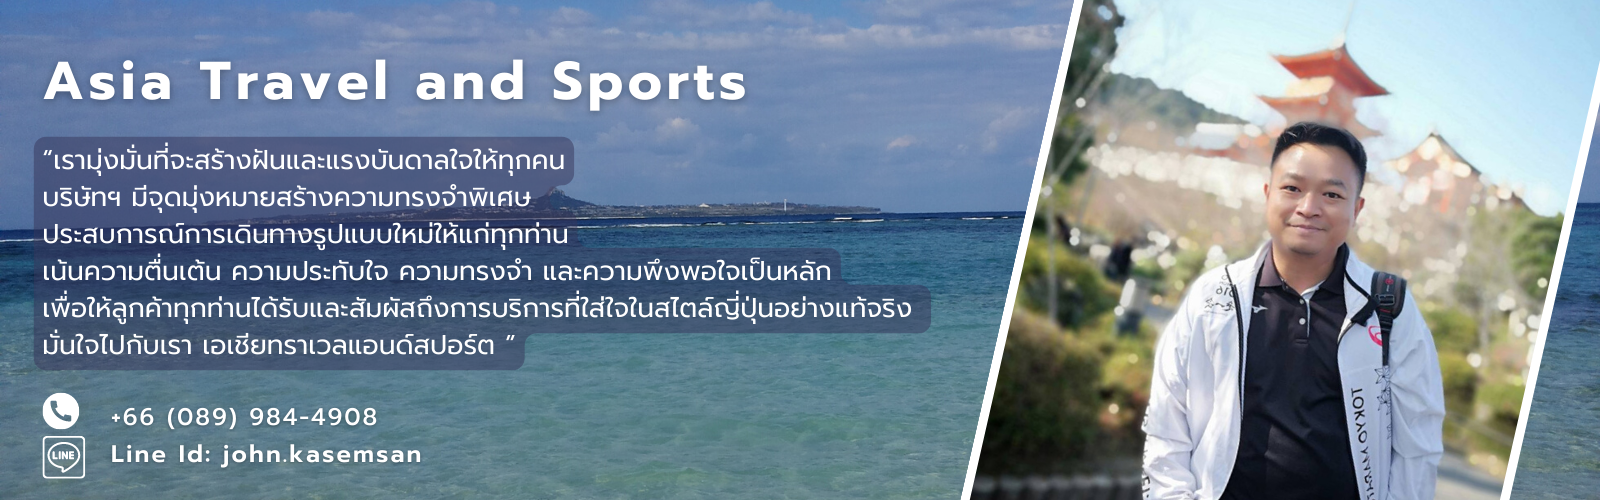 asia travel and sports co. ltd